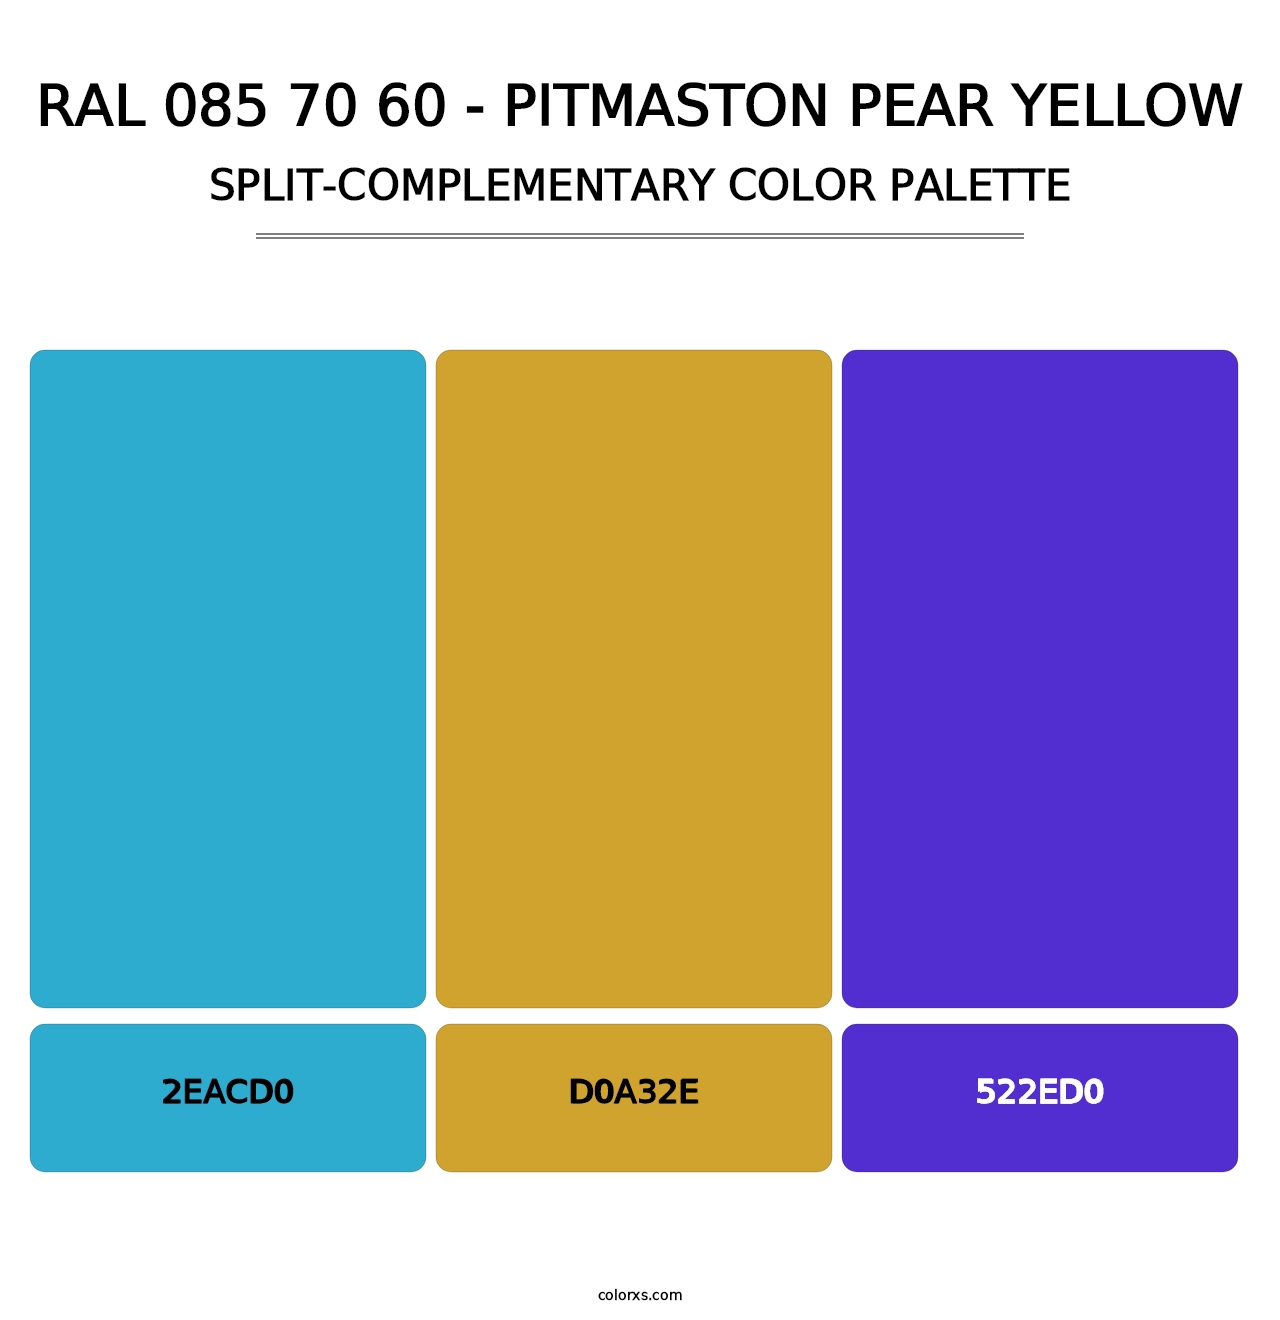 RAL 085 70 60 - Pitmaston Pear Yellow - Split-Complementary Color Palette